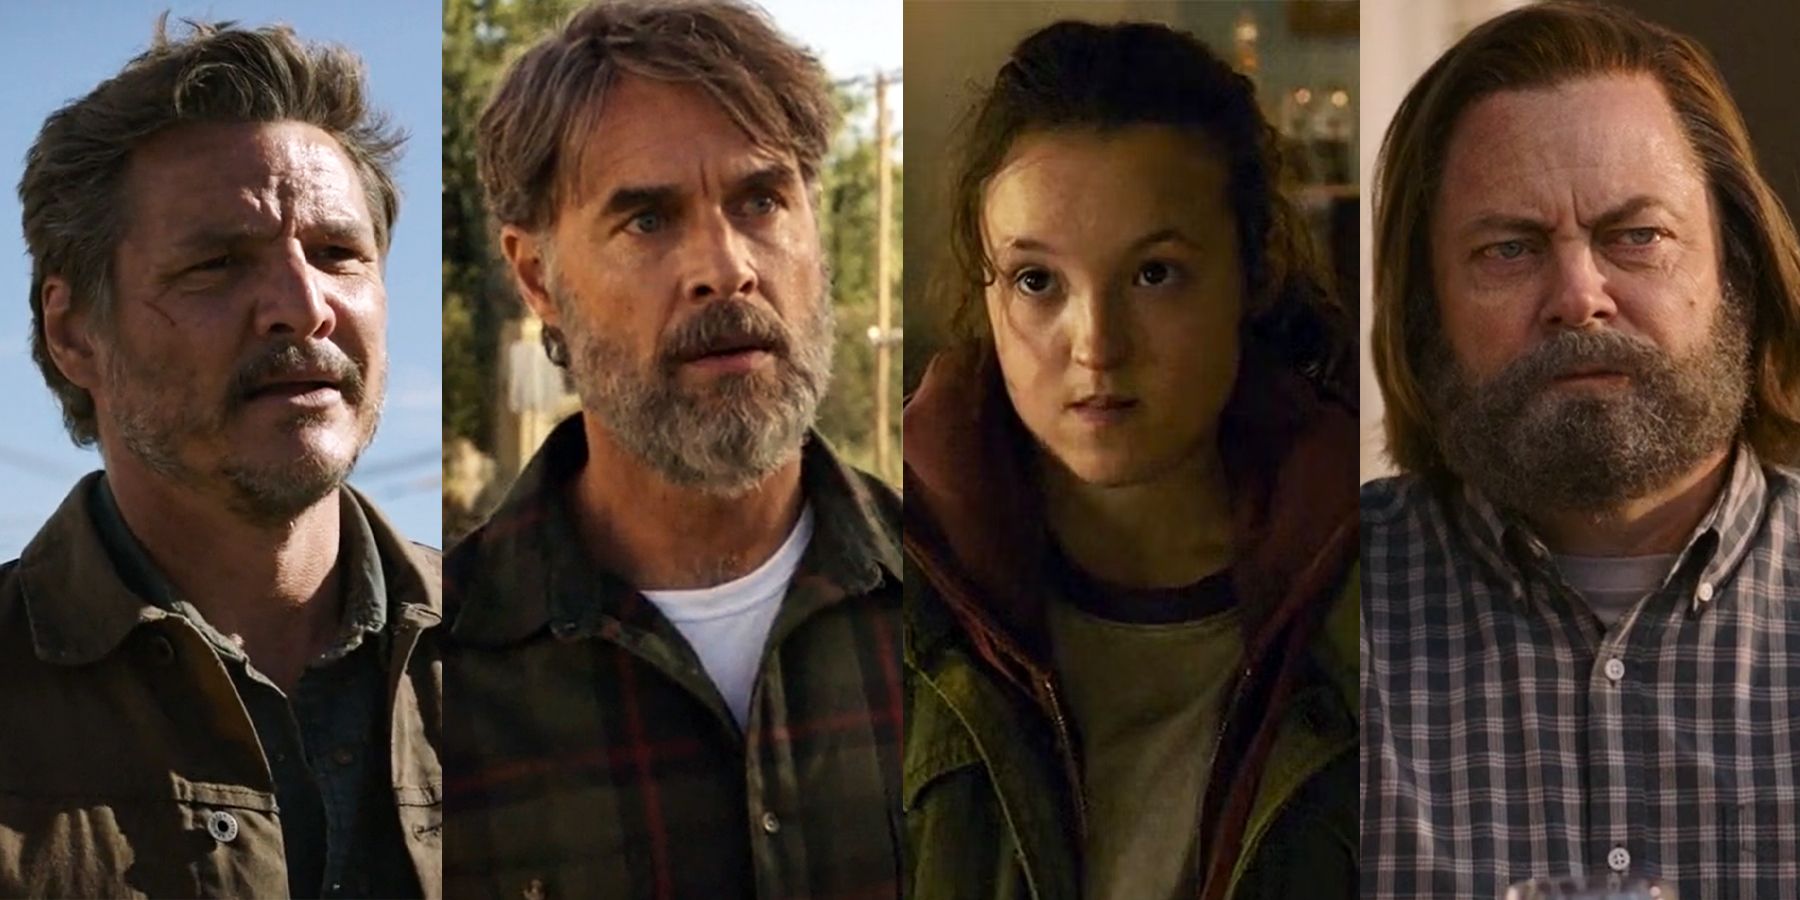 The Last of Us Episode 3 characters